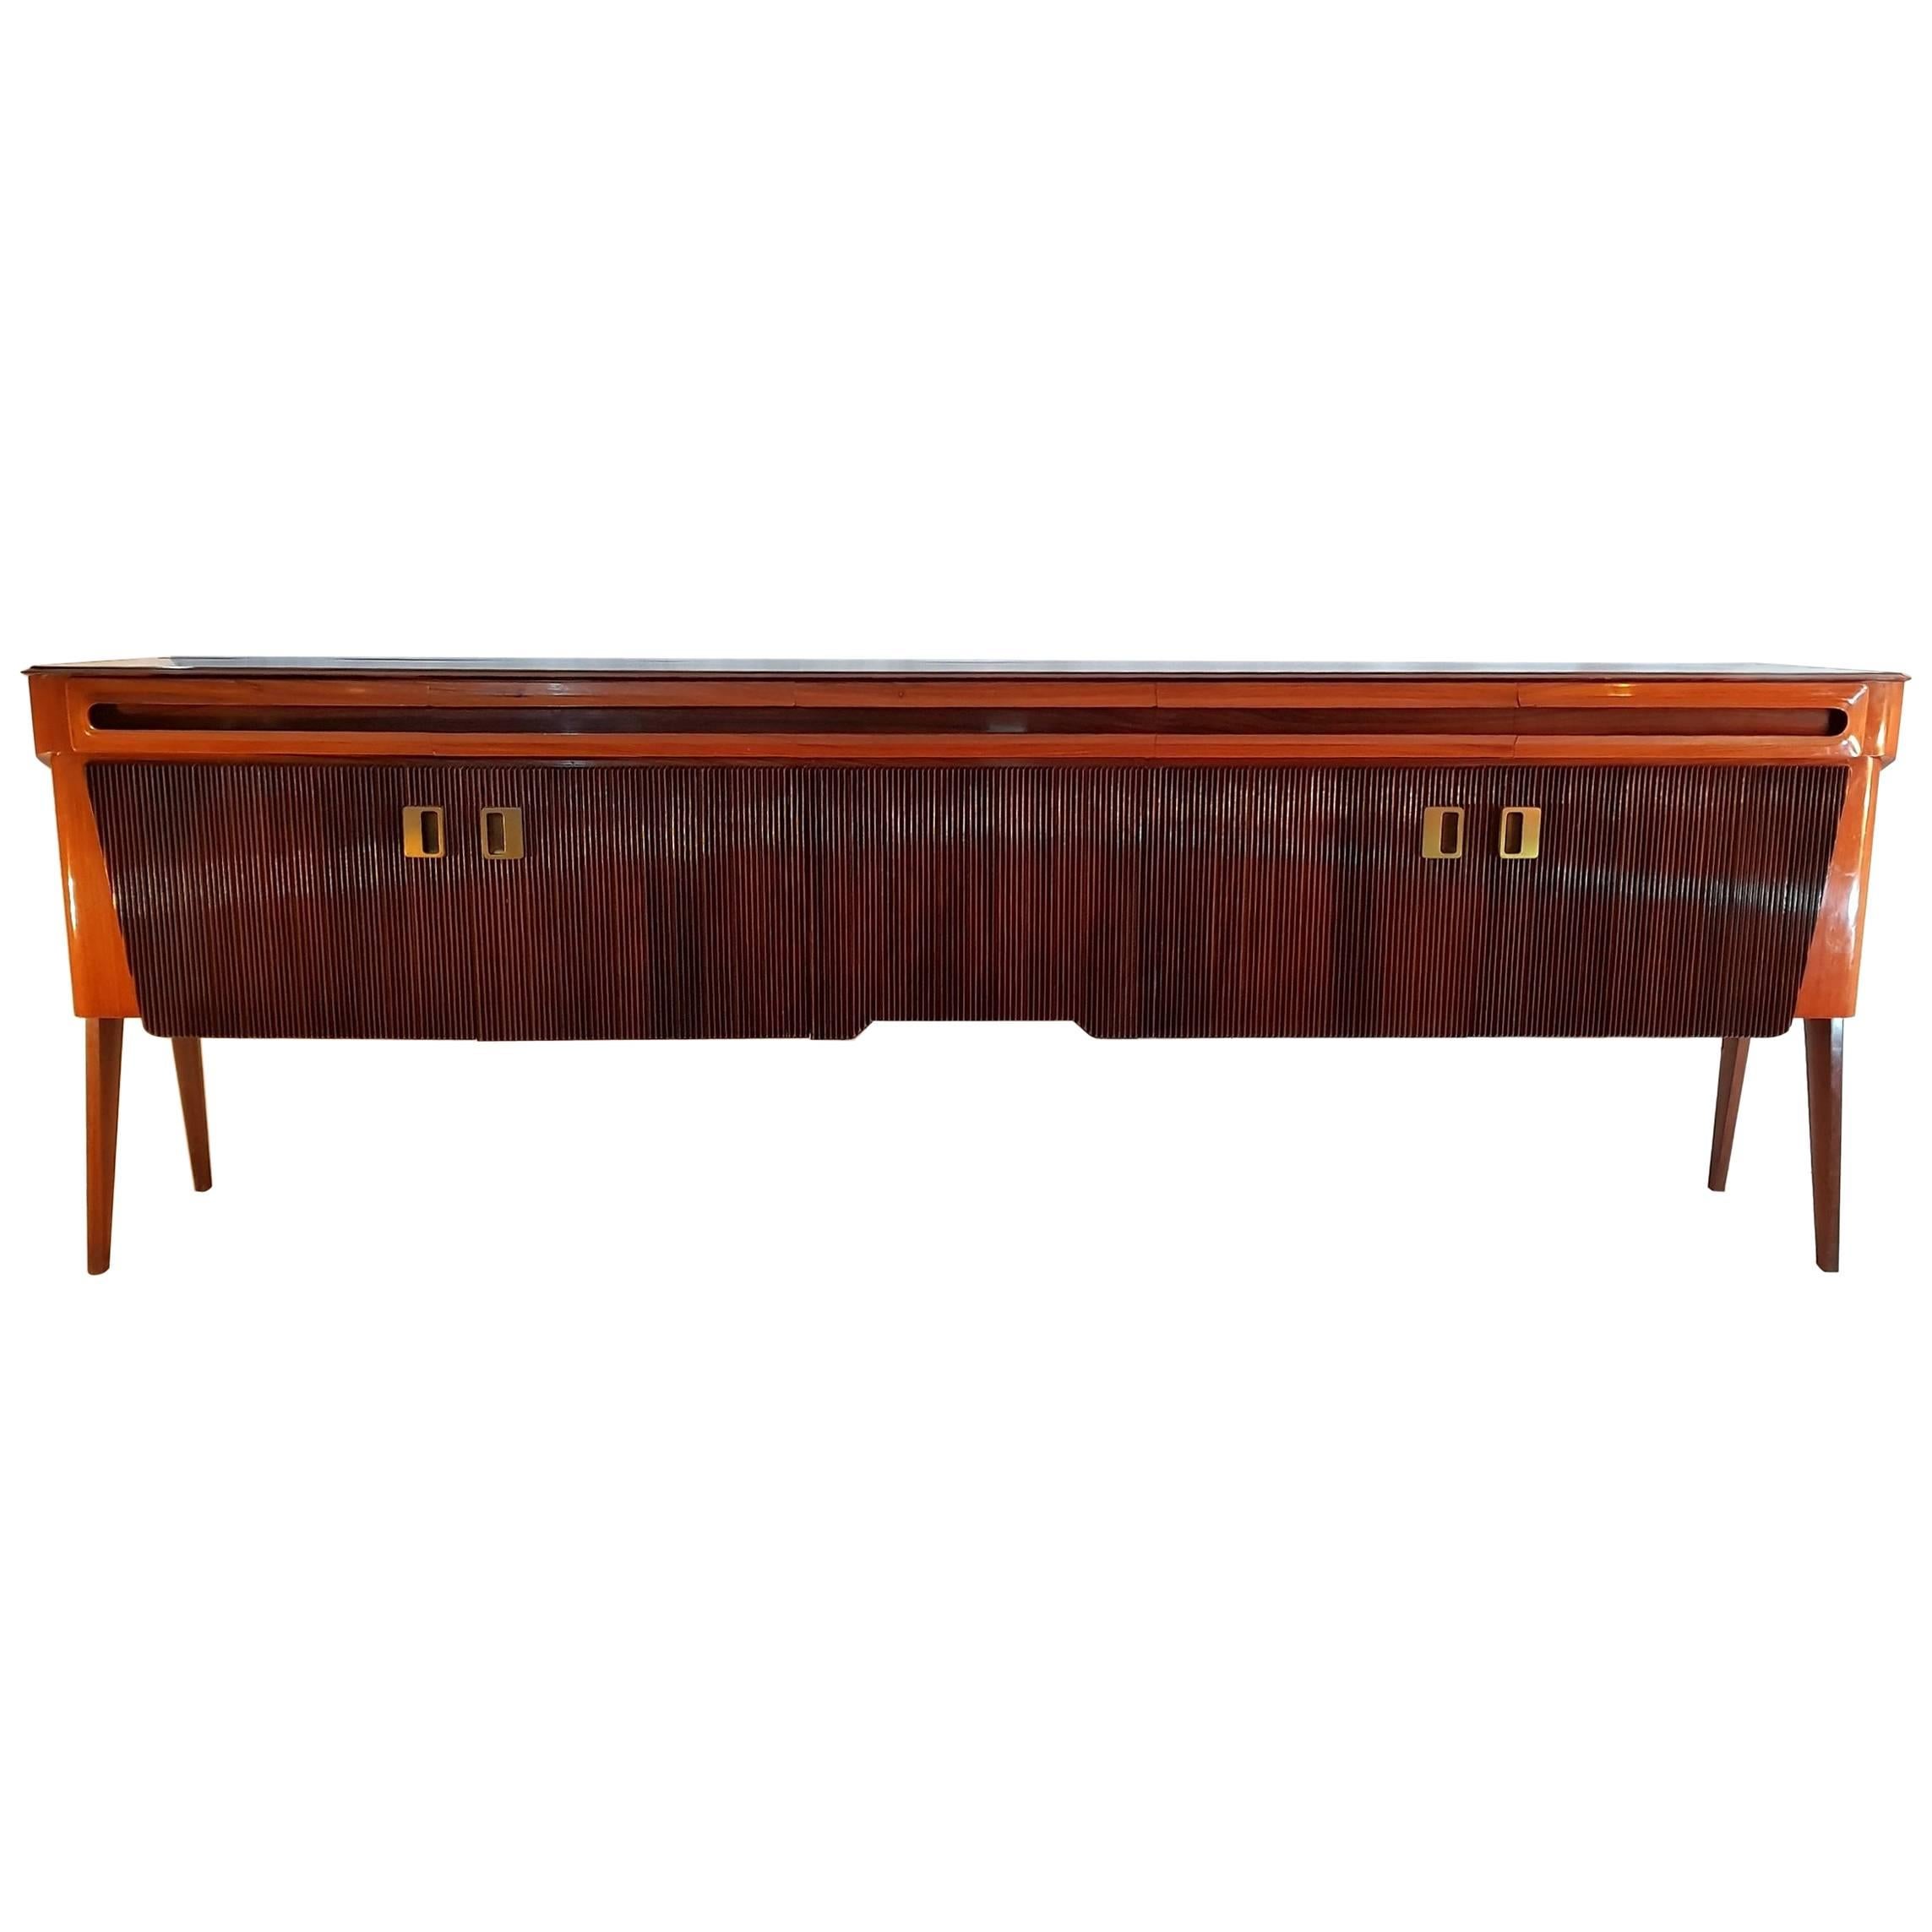 Midcentury Large Sideboard by Galleria Mobili D´arte Cantu, Italy, 1950s